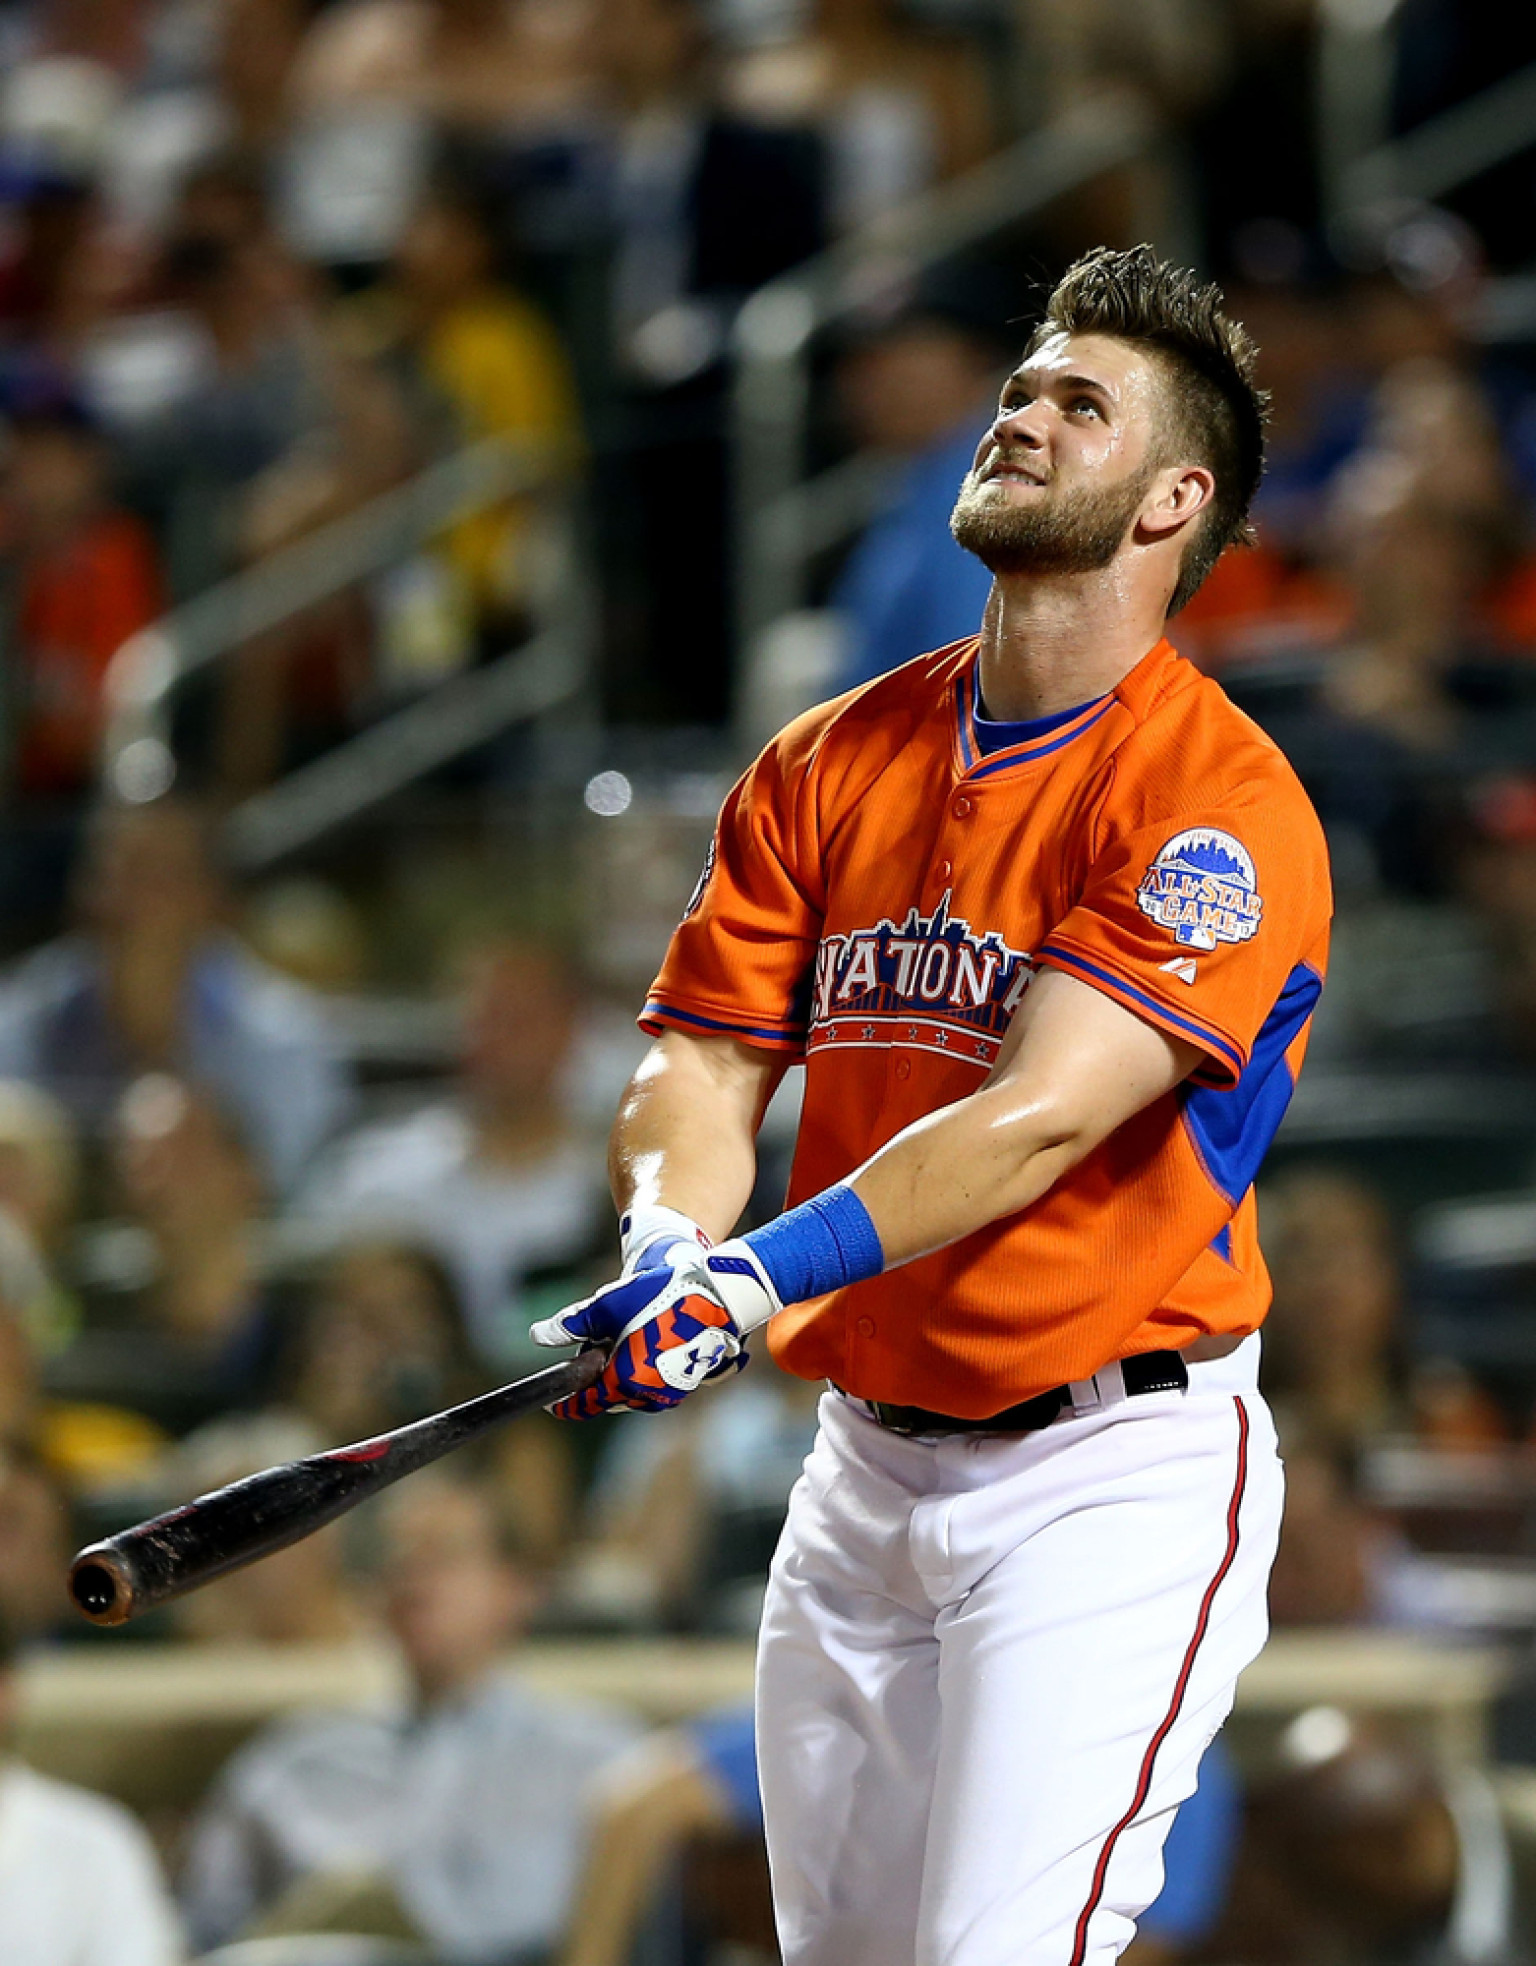 Bryce Harper's Brother's Mustache Sticks Out At 2013 Home Run Derby (PHOTO)